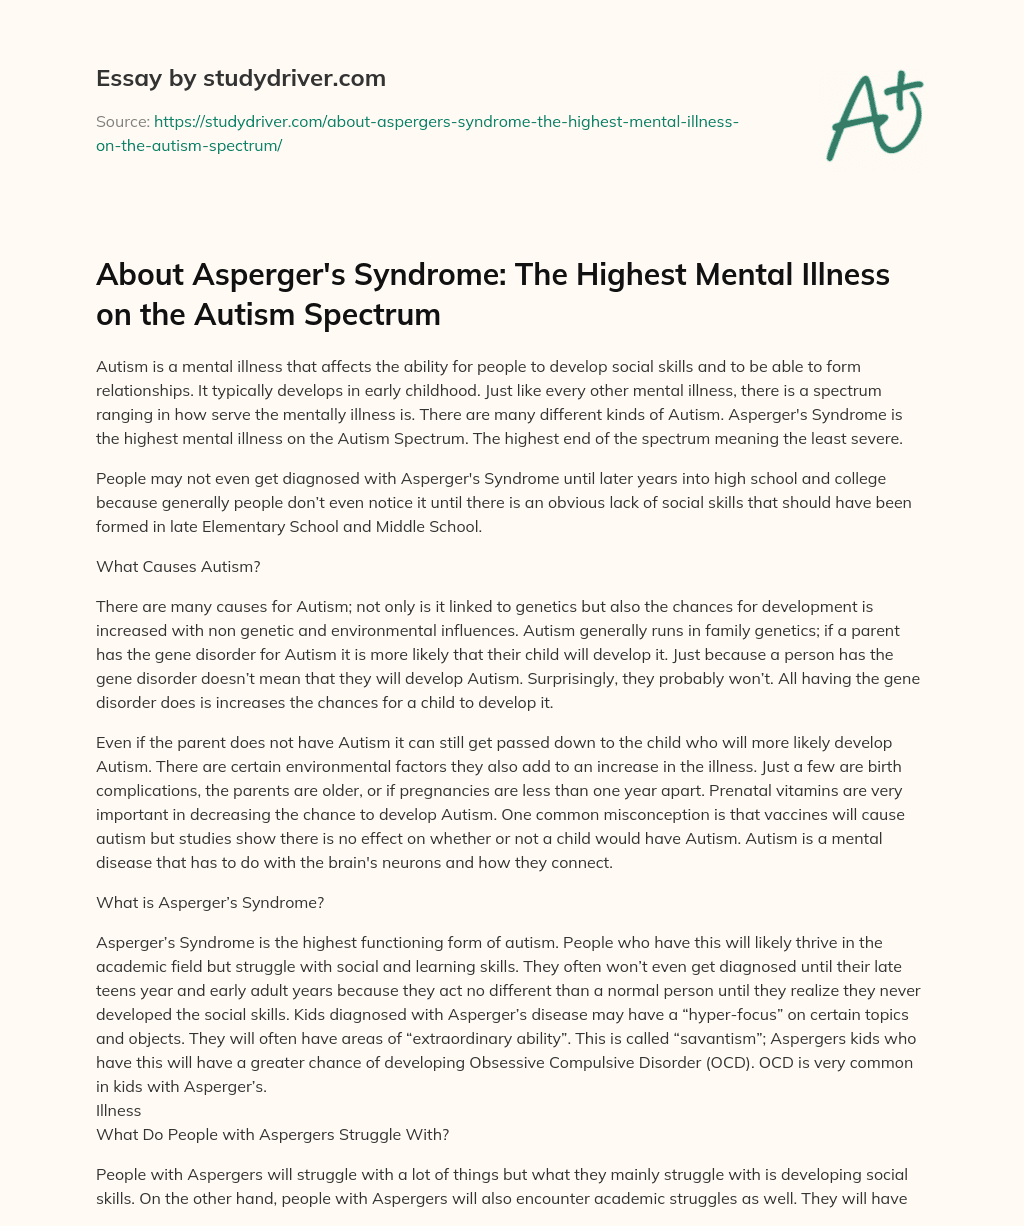 About Asperger’s Syndrome: the Highest Mental Illness on the Autism Spectrum essay